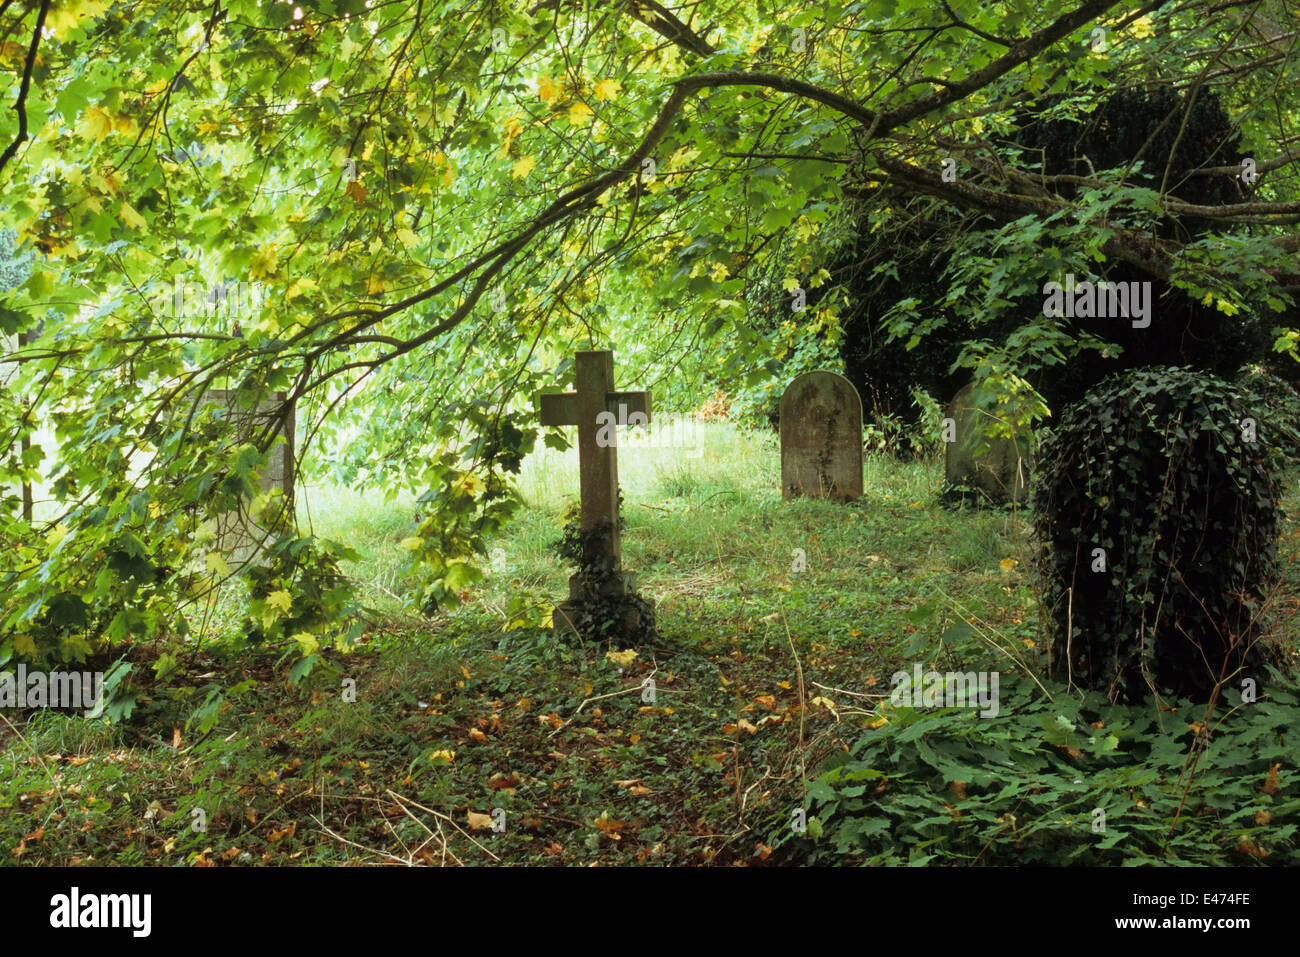 Backlit Sycamore tree leaning over gravestones including crucifix stone in early autumn Stock Photo